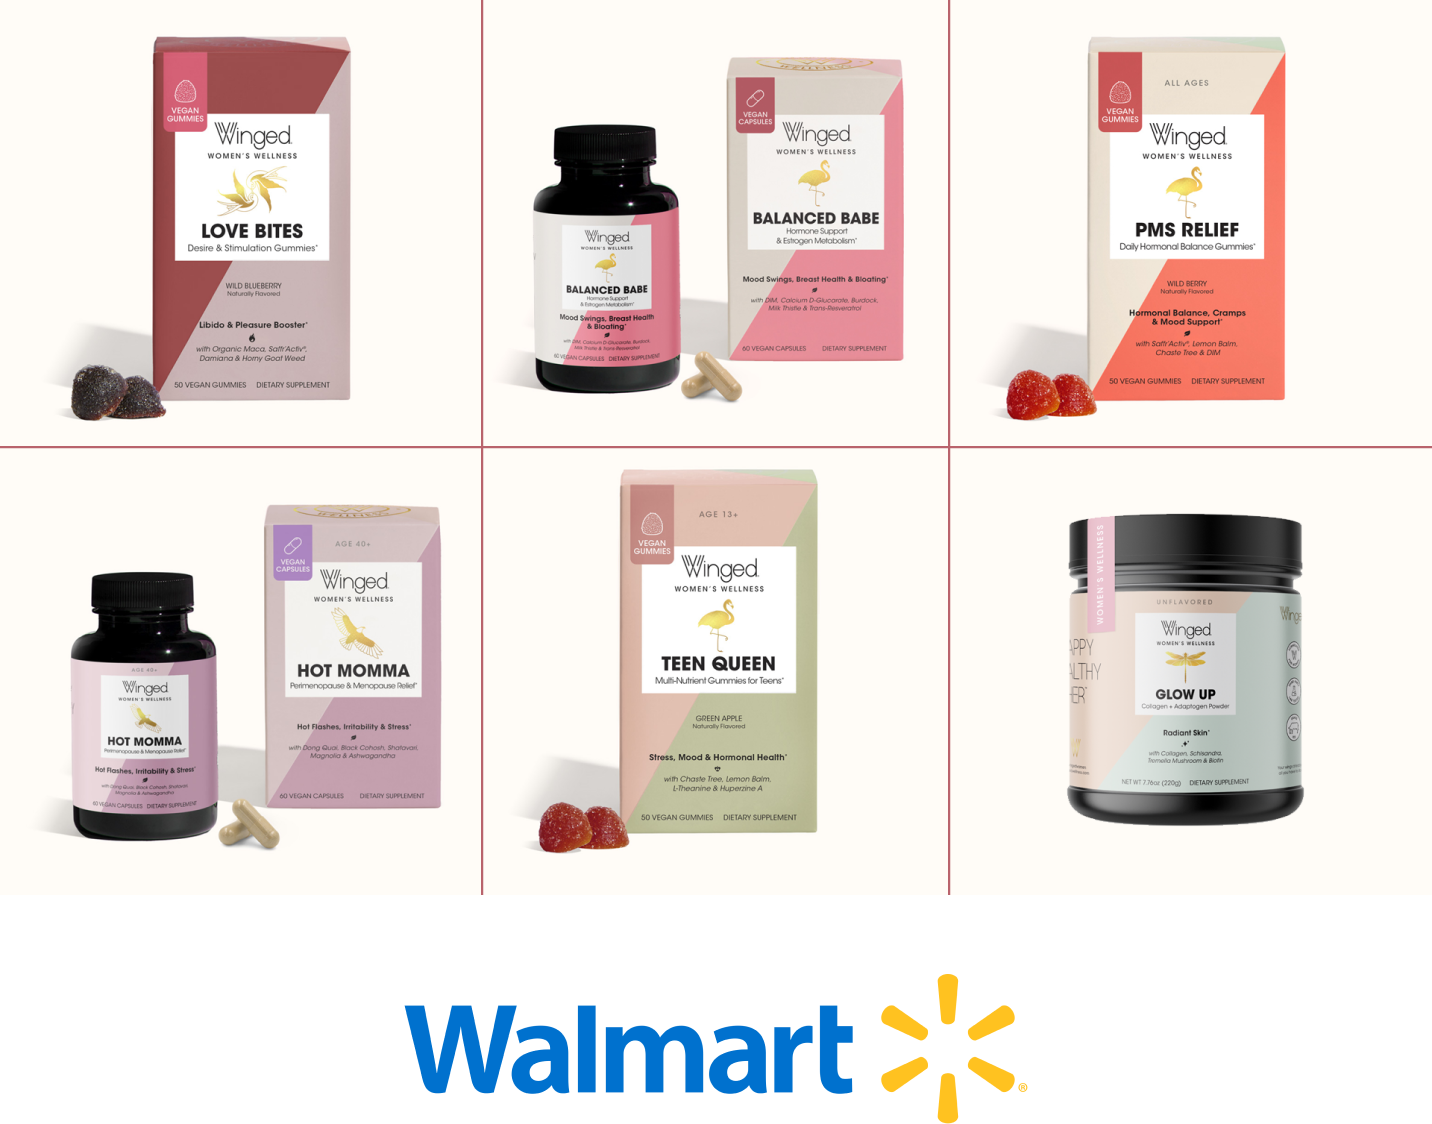 FREE Winged Wellness Product at Walmart